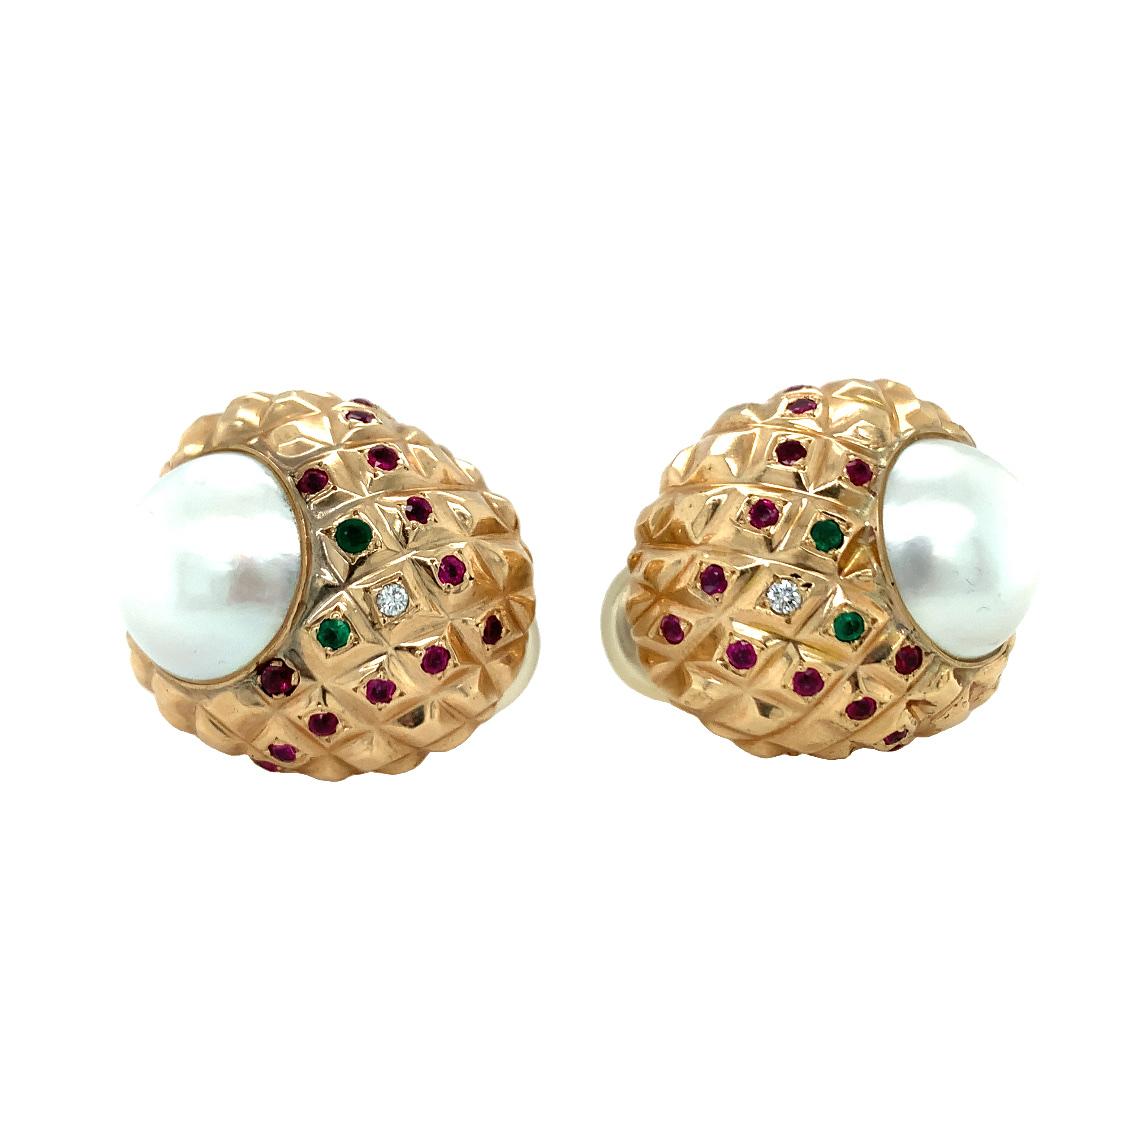 One pair of pearl and multi-gem 18K yellow gold earrings featuring two white mabe pearls measuring 15 millimeters in diameter with rosey overtones. The chunky, close to the ear hoop earrings are further accented by 26 round rubies weighing 1.10 ct.,